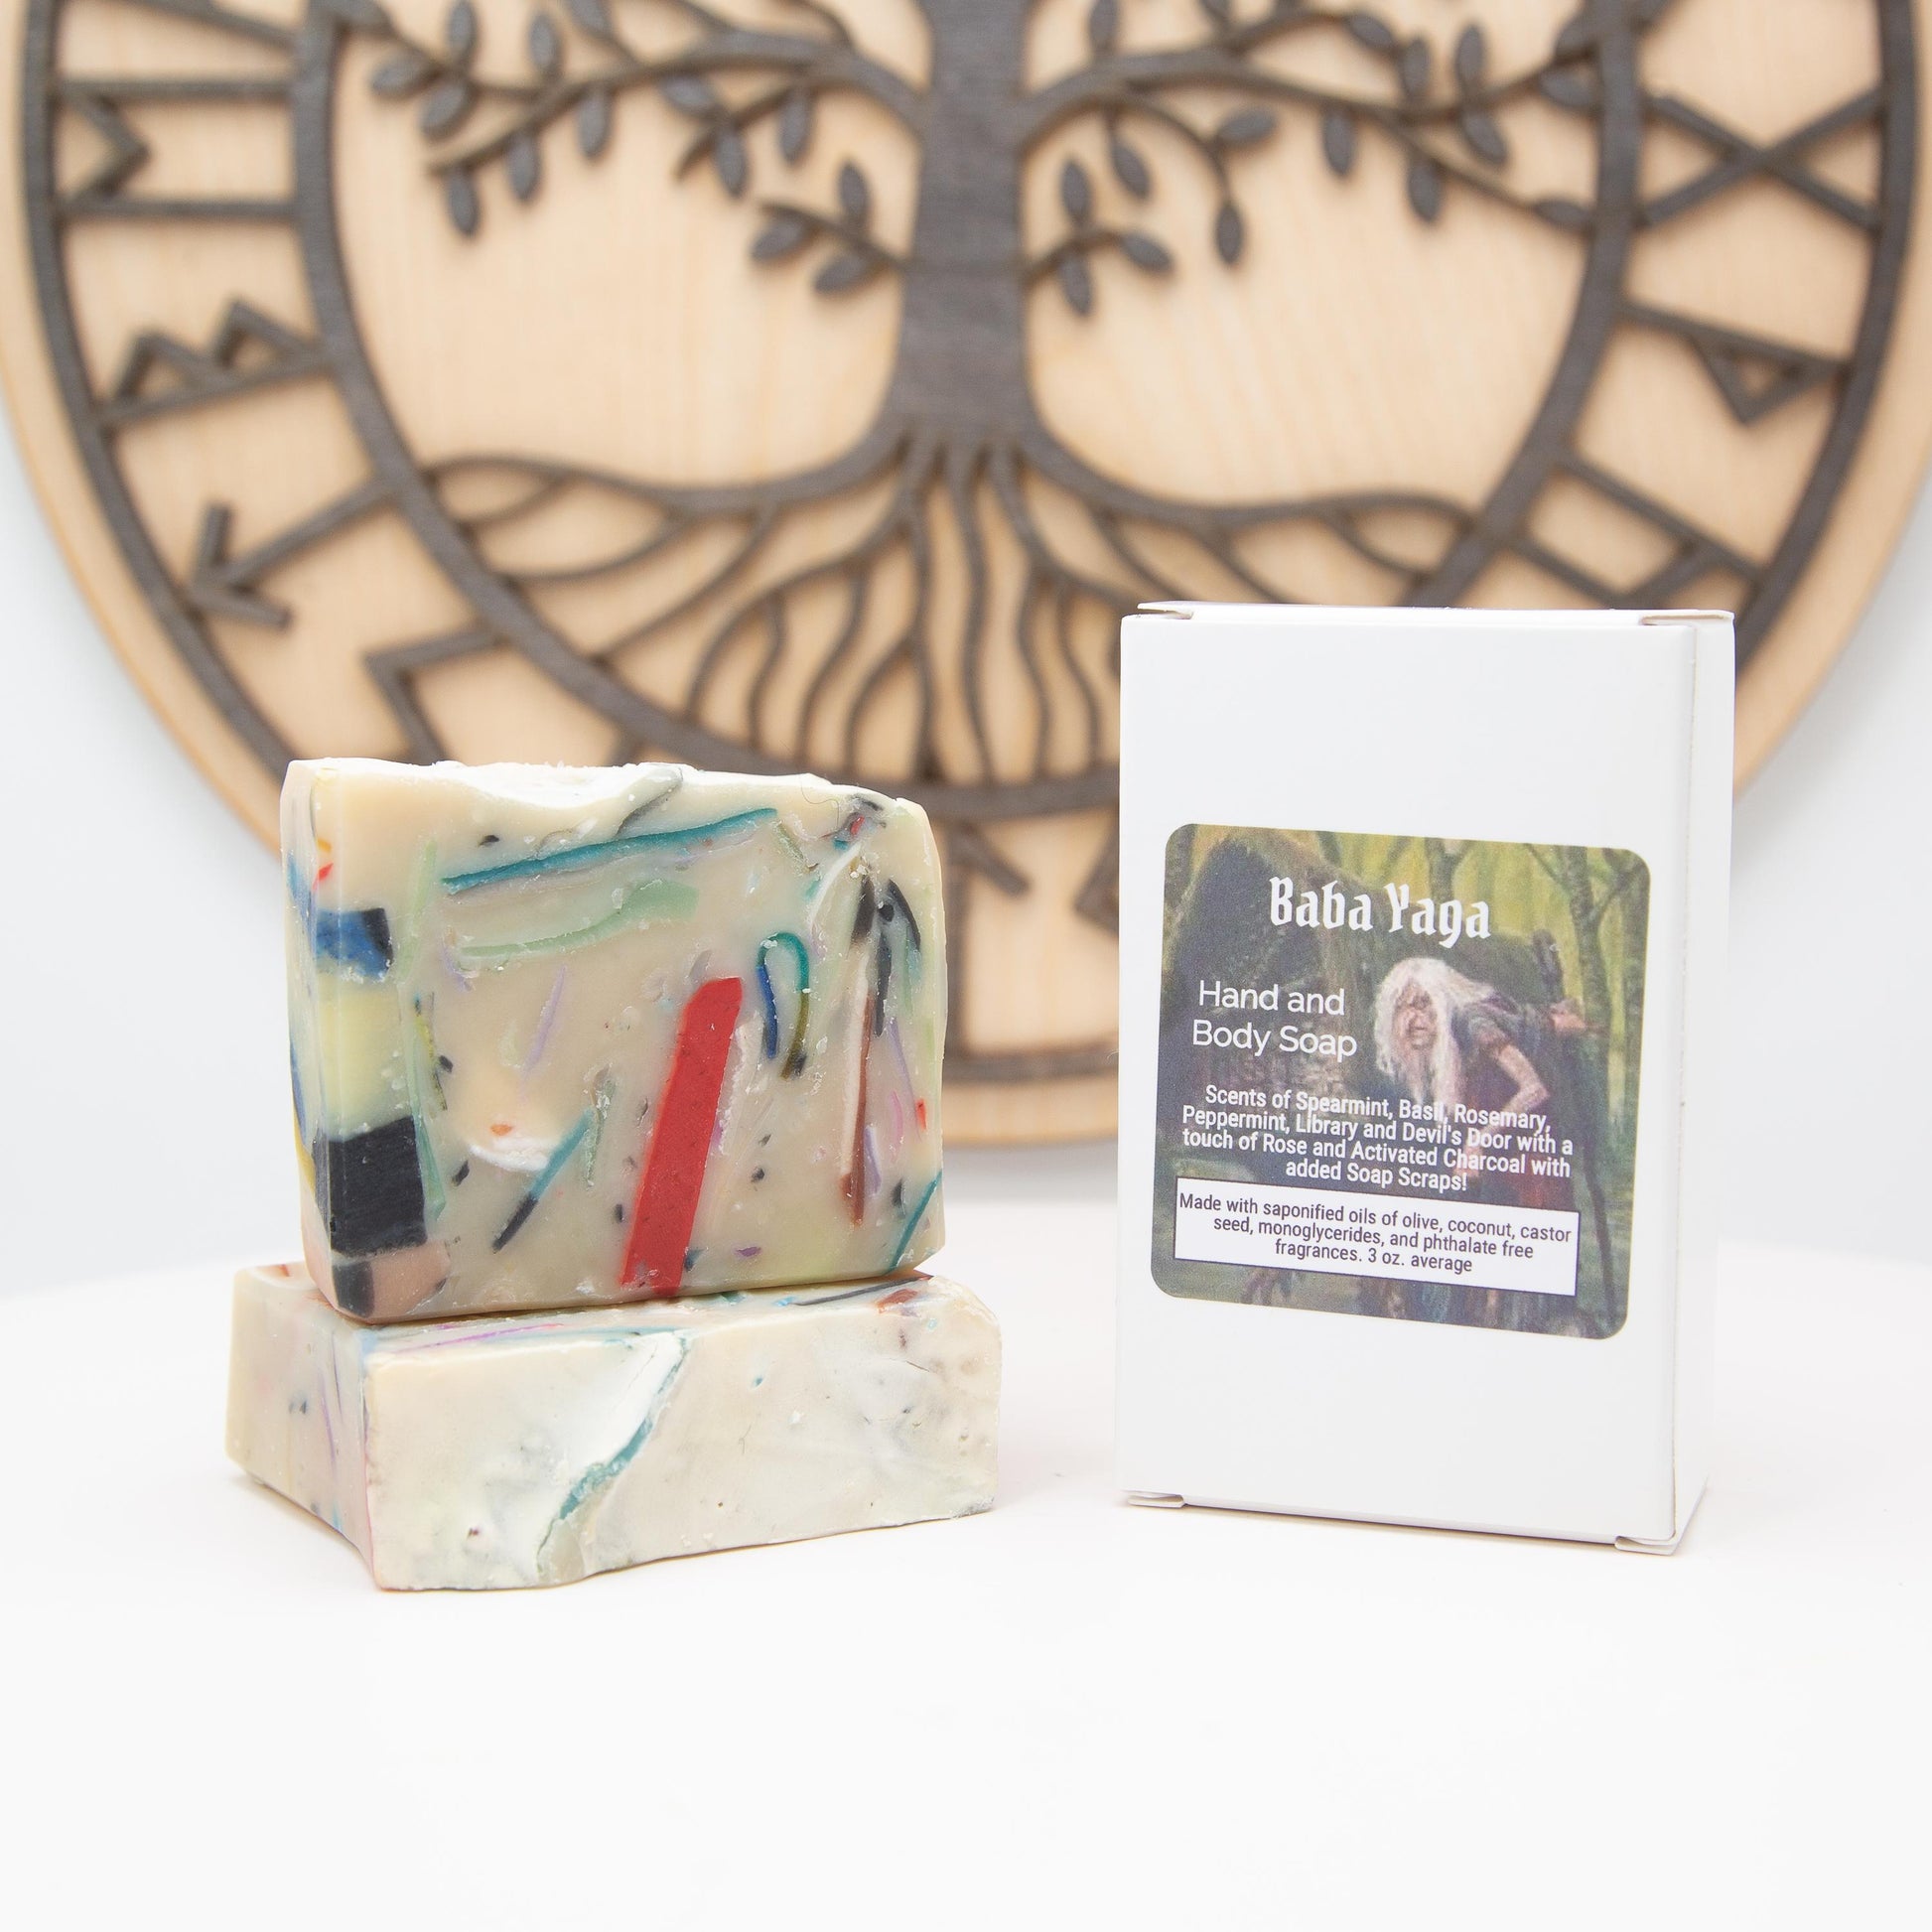 Baba Yaga - Spearmint, Basil, Rosemary, Peppermint, Old Books, Devil's Door (Patchouli, Black Pepper, and Vanilla), and Rose Soap, Birds of Valhalla, Limited, Birds of Valhalla